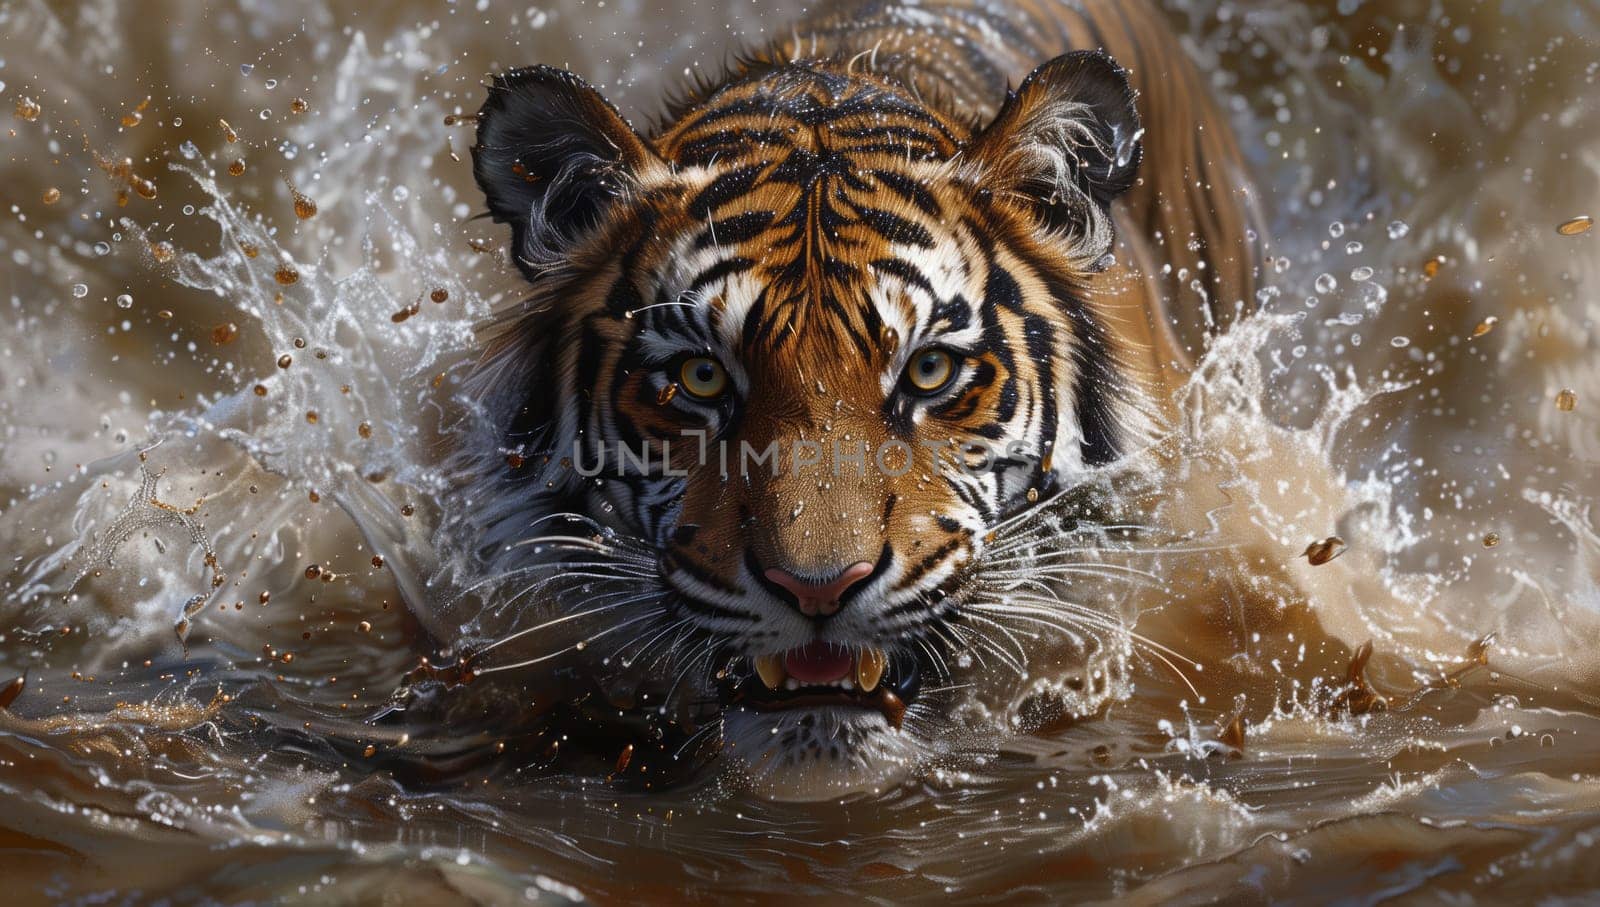 A beautiful painting of a Bengal tiger swimming gracefully in the water, showcasing the majestic big cats strength and elegance